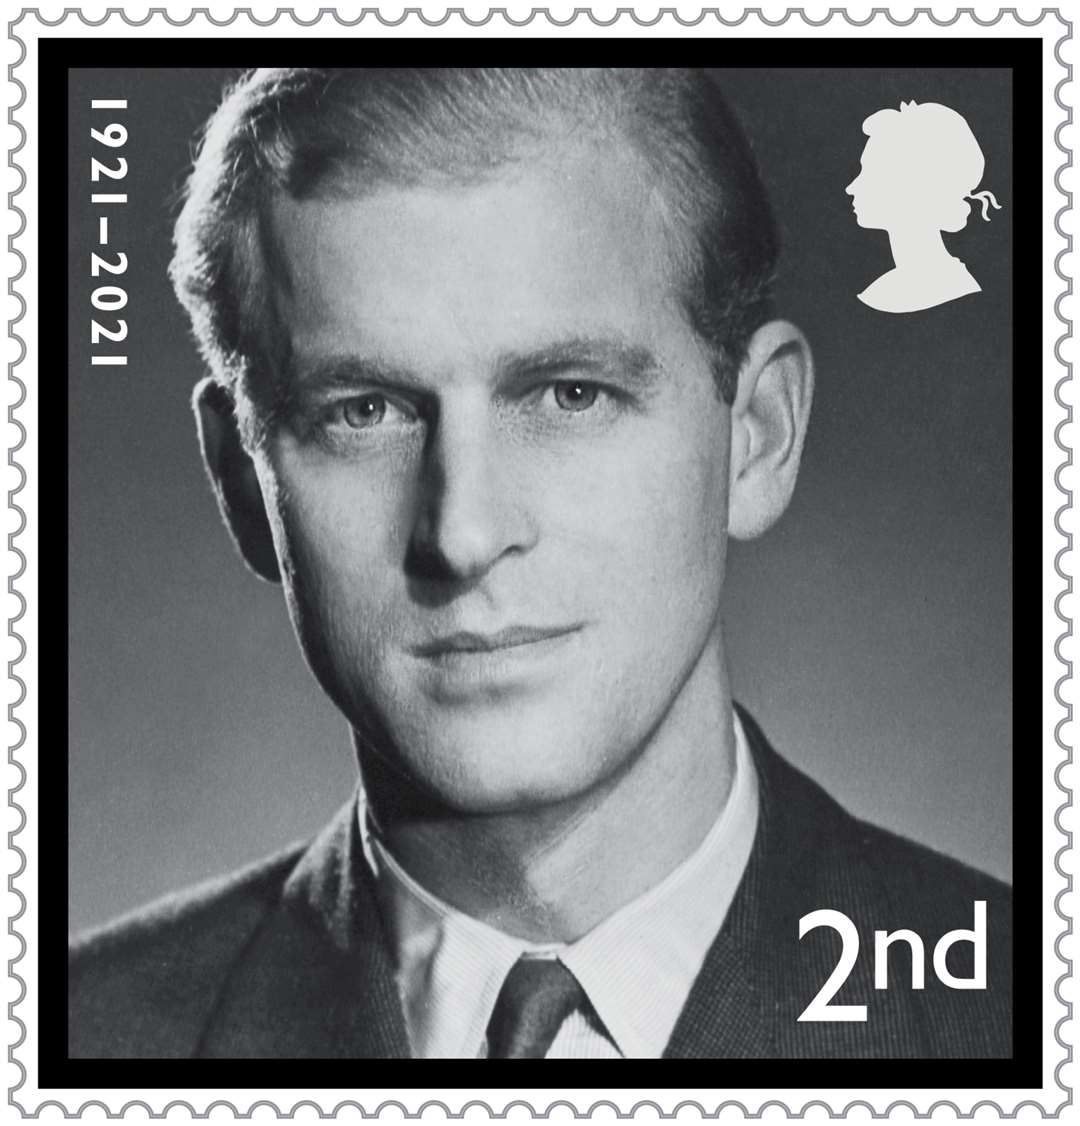 A photograph of Prince Philip as a young man is among the images chosen for the stamps